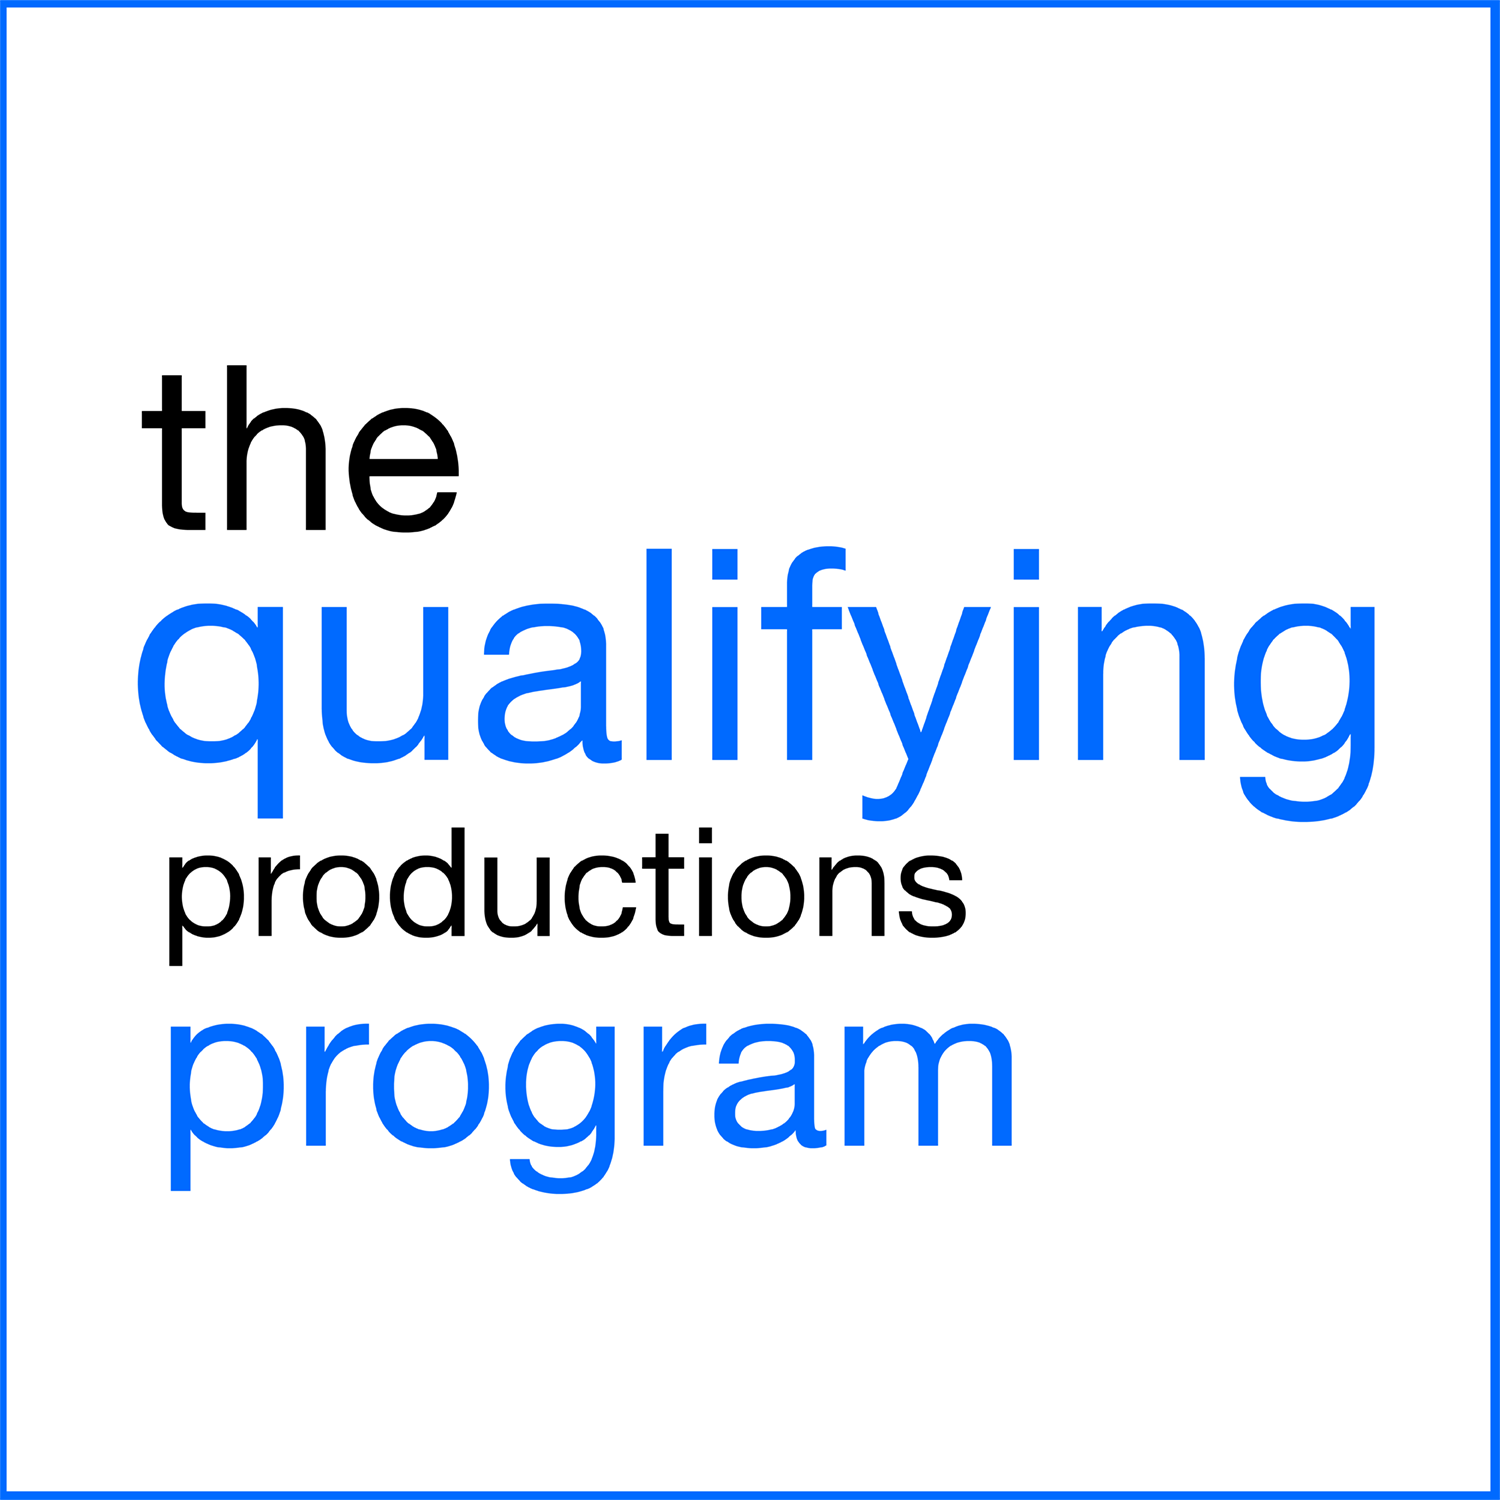 the qualifying productions program